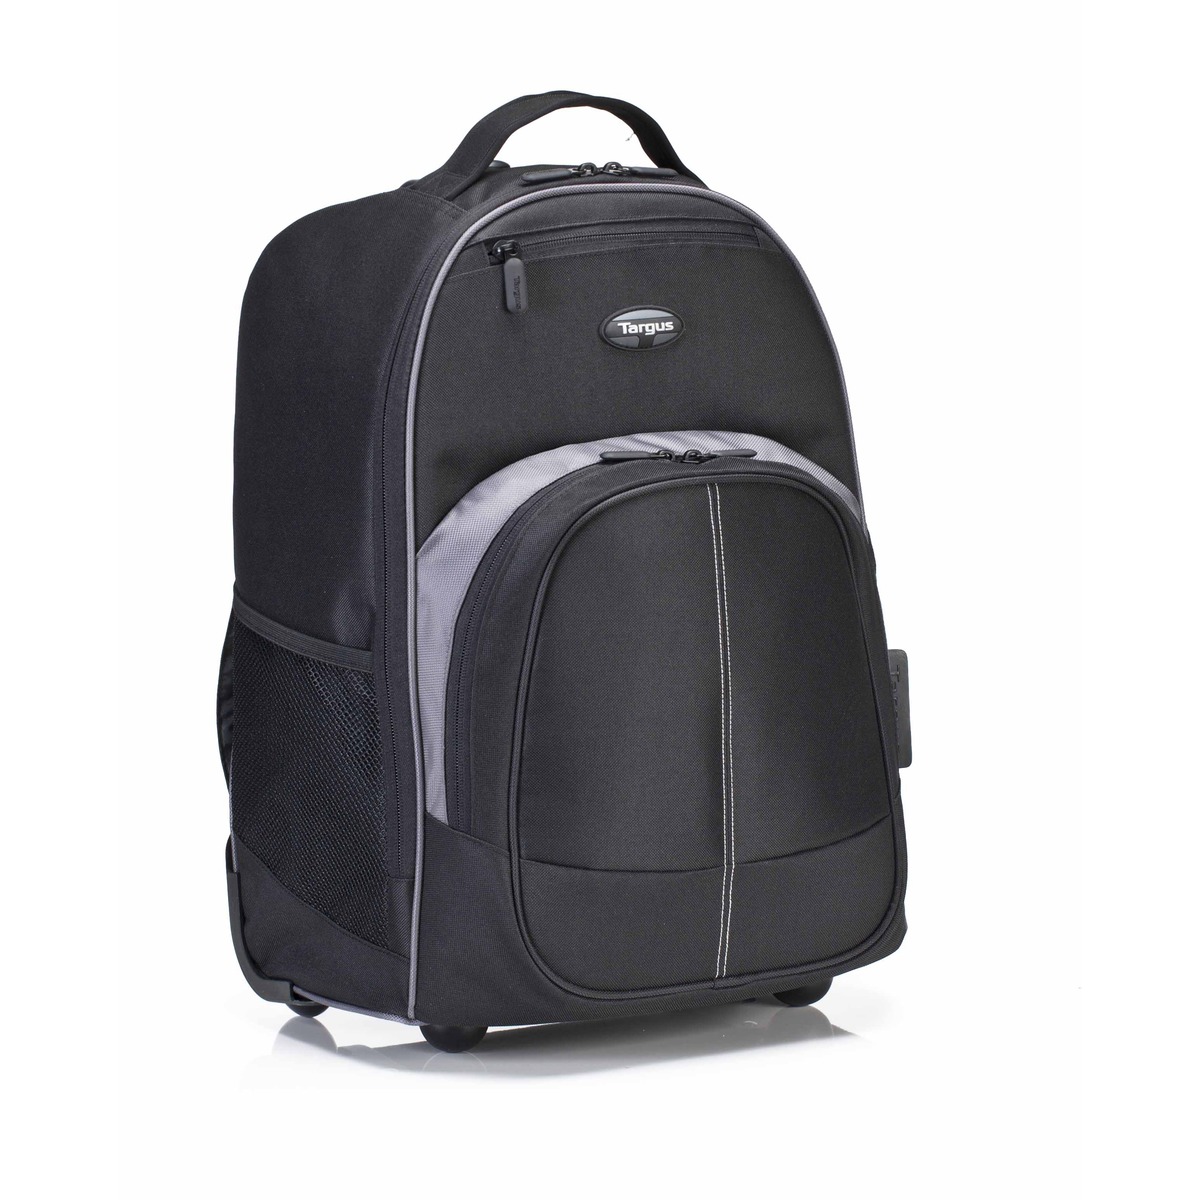 Targus 16" Compact Rolling Laptop Backpack, Black - image 4 of 10